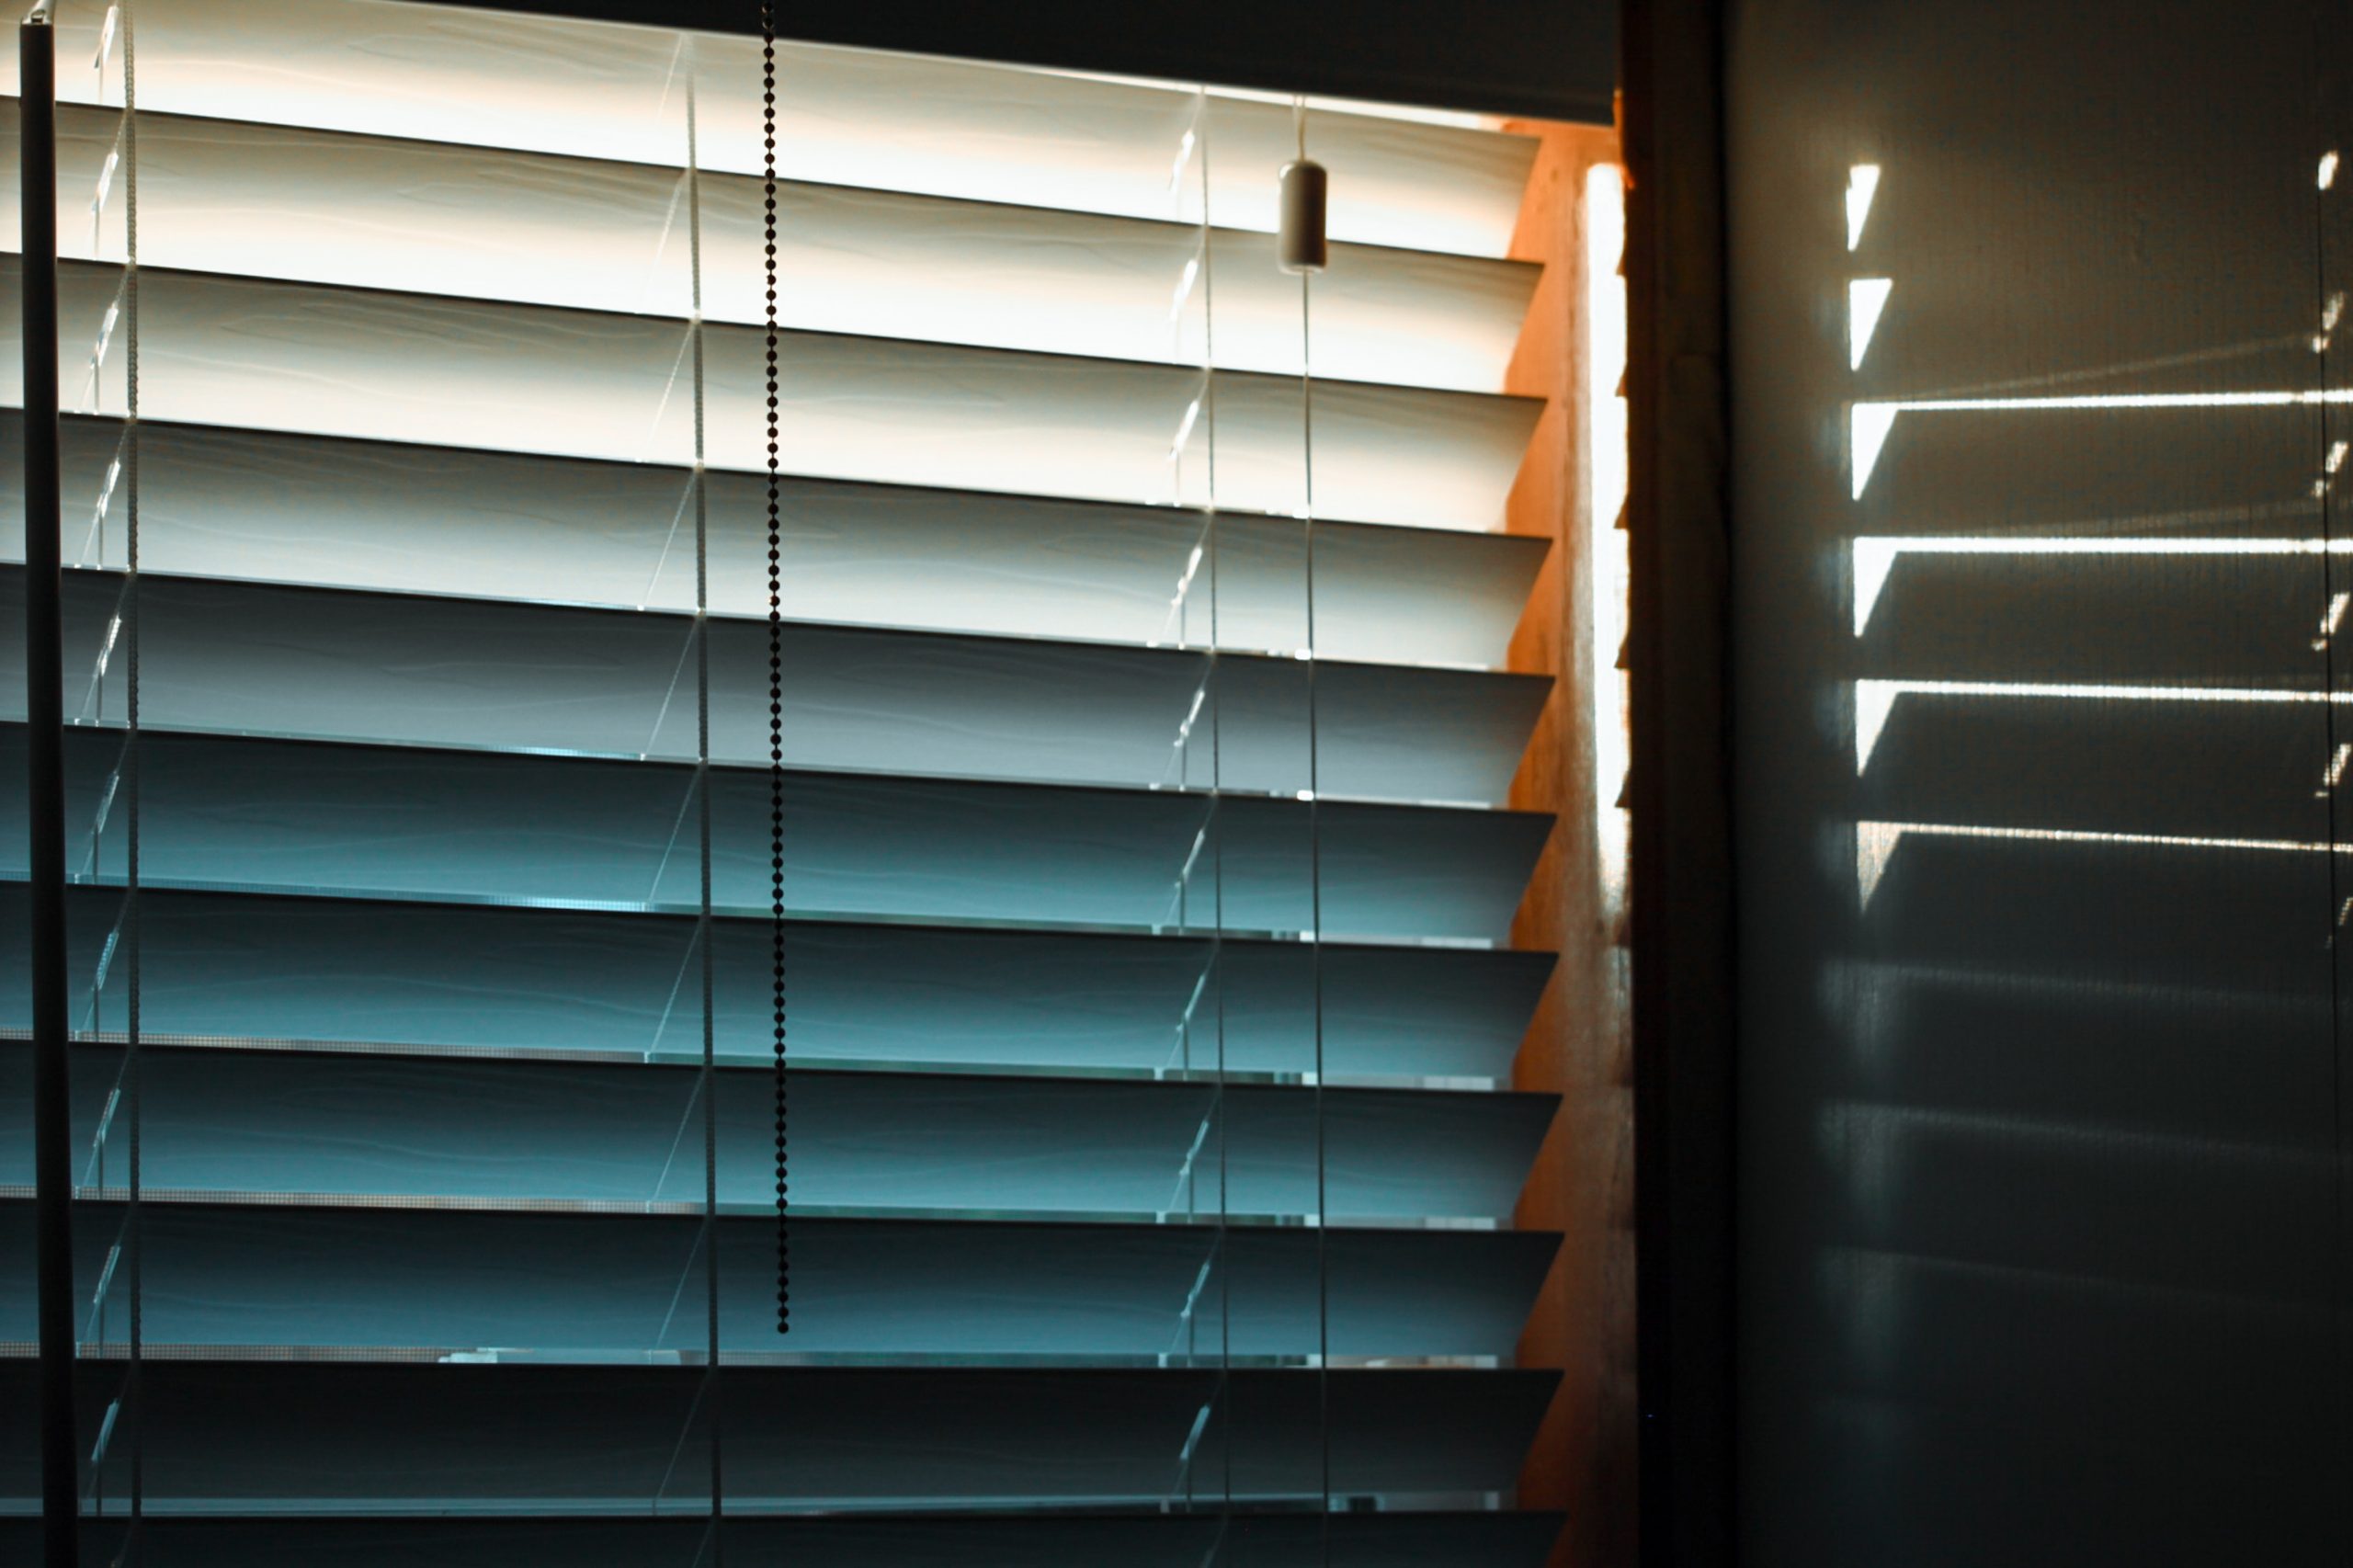 Use your blinds and curtains to keep warm and save electricity this winter.